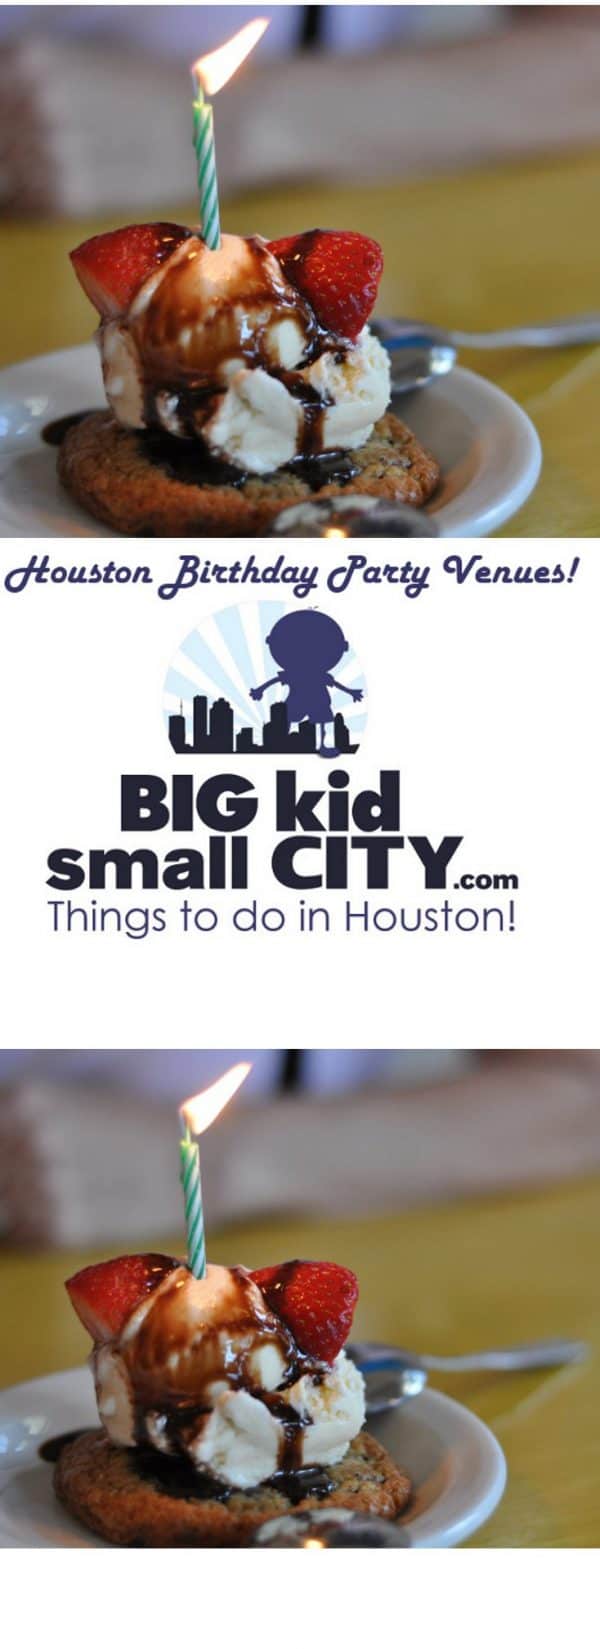 Birthday Party Places in Houston! – JillBJarvis.com